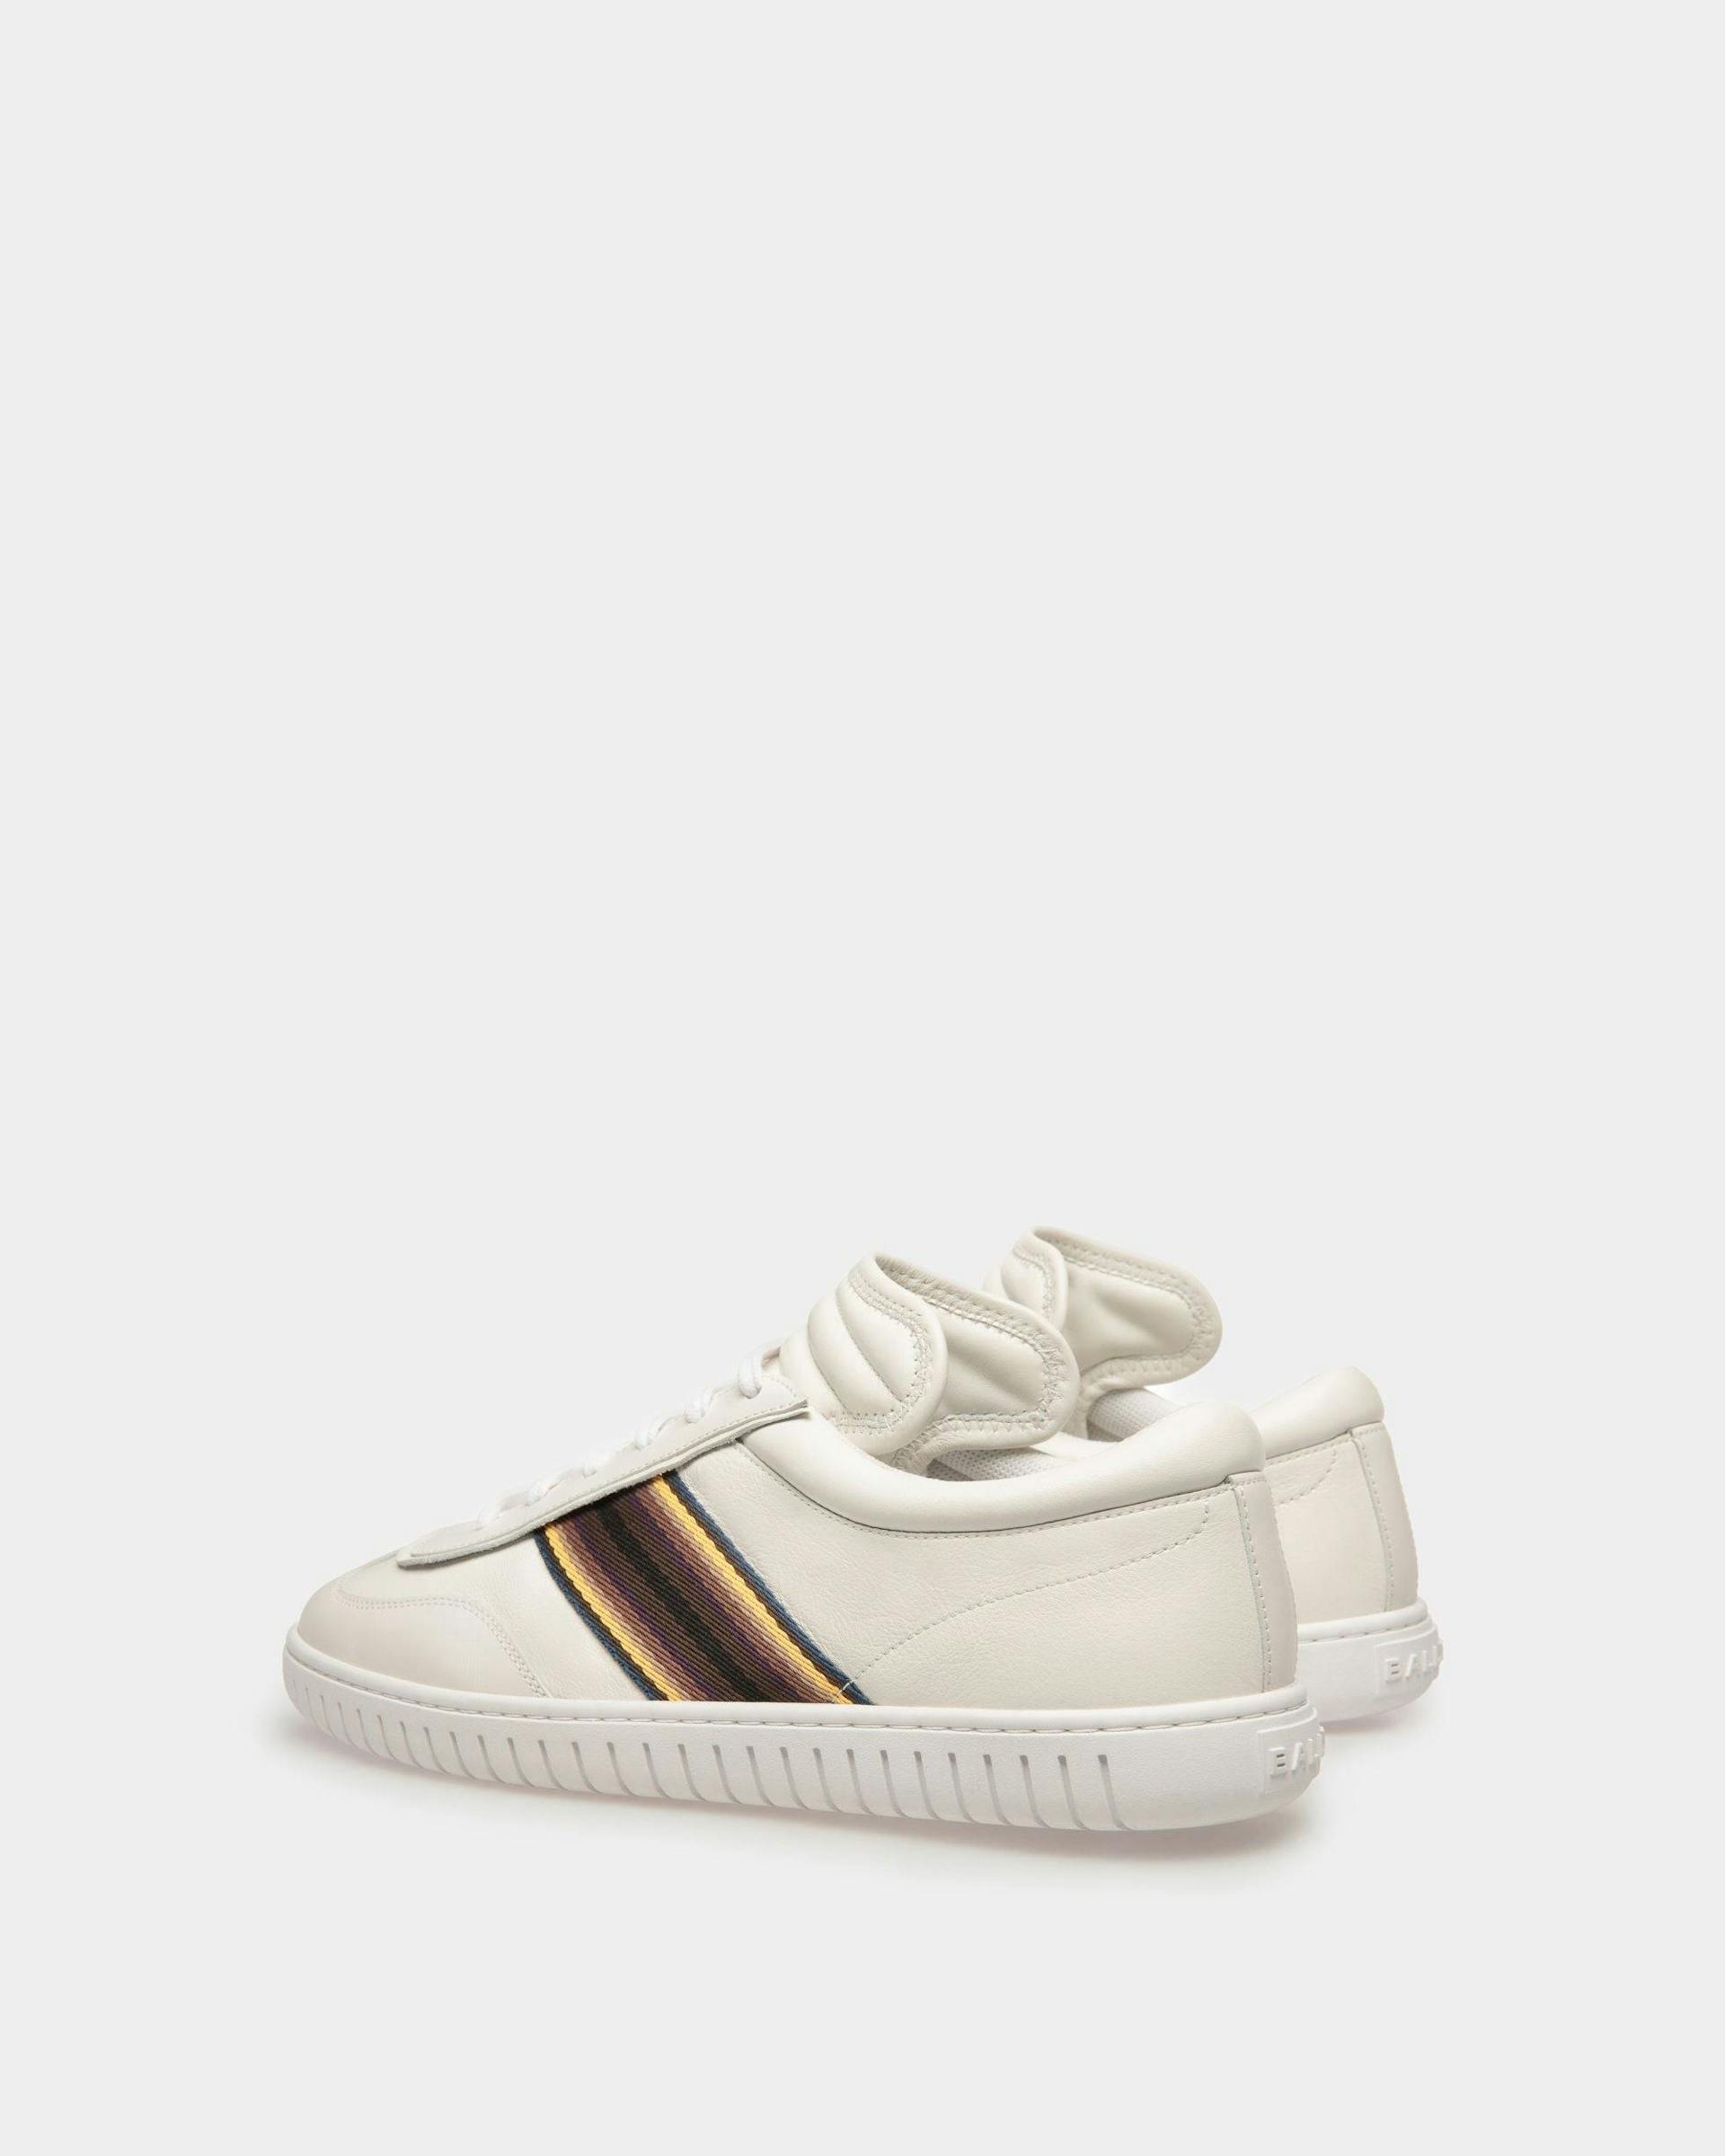 Men's Player Sneakers In White Leather | Bally | Still Life 3/4 Back